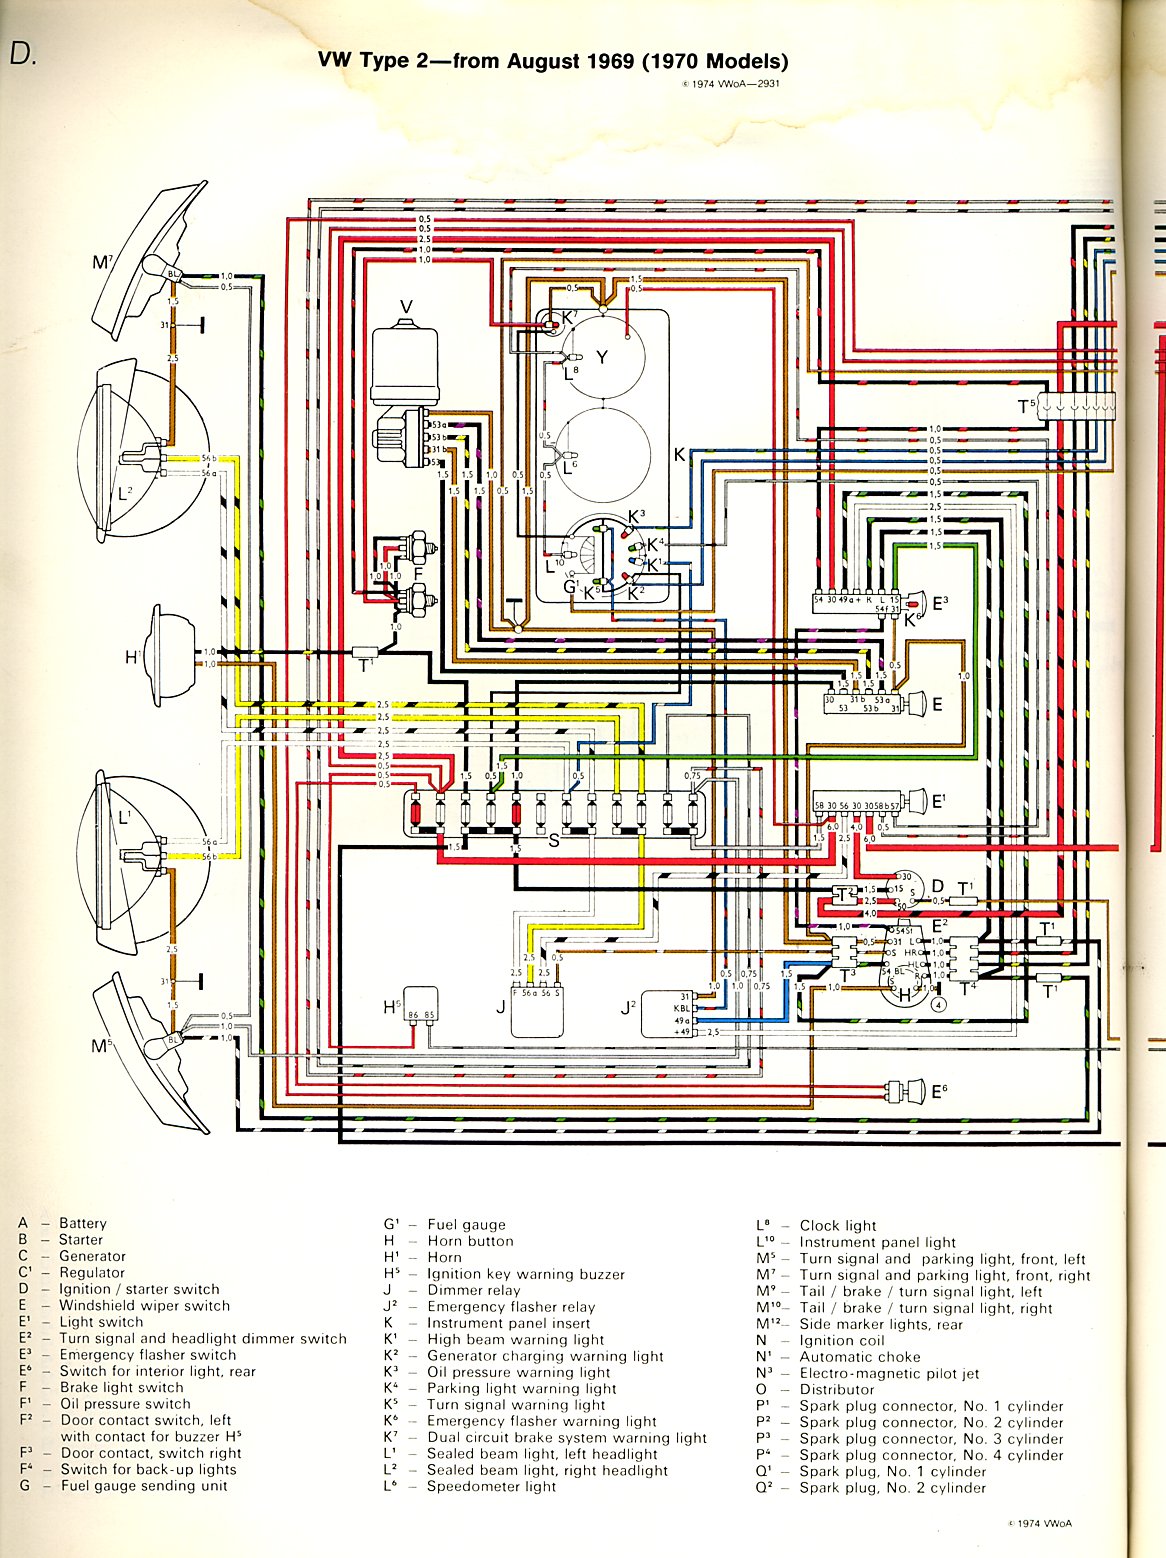 '70 Bus Wiring Mystery - Itinerant Air-Cooled